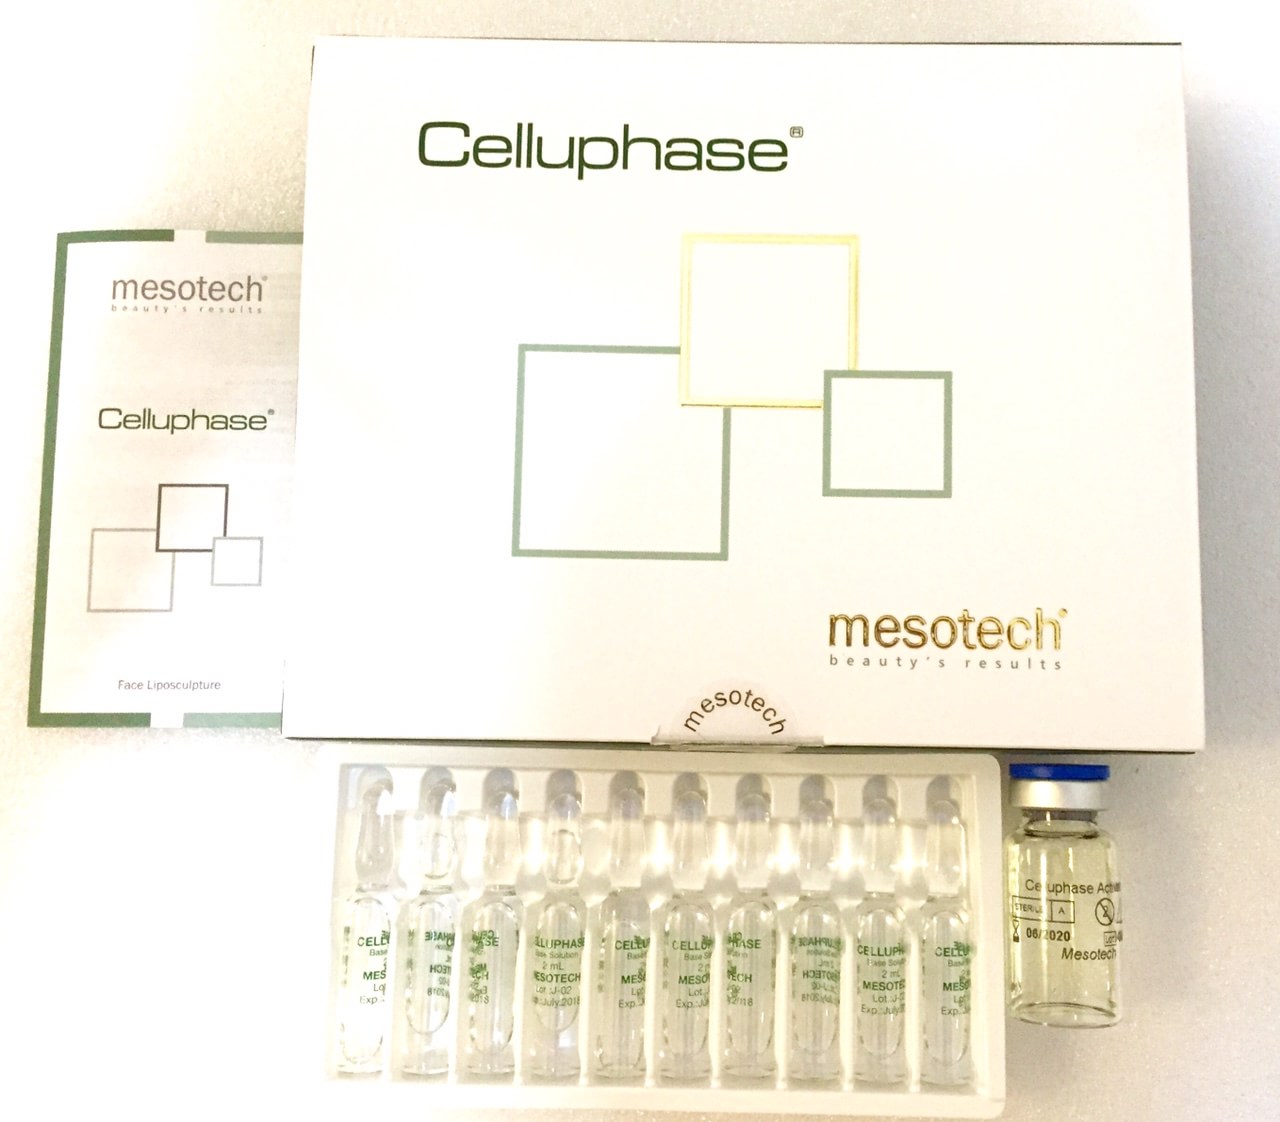 MESOTECH CELLUPHASE (ITALY) SLIM AND BURN INJECTION by "www.ccthaitown.com"